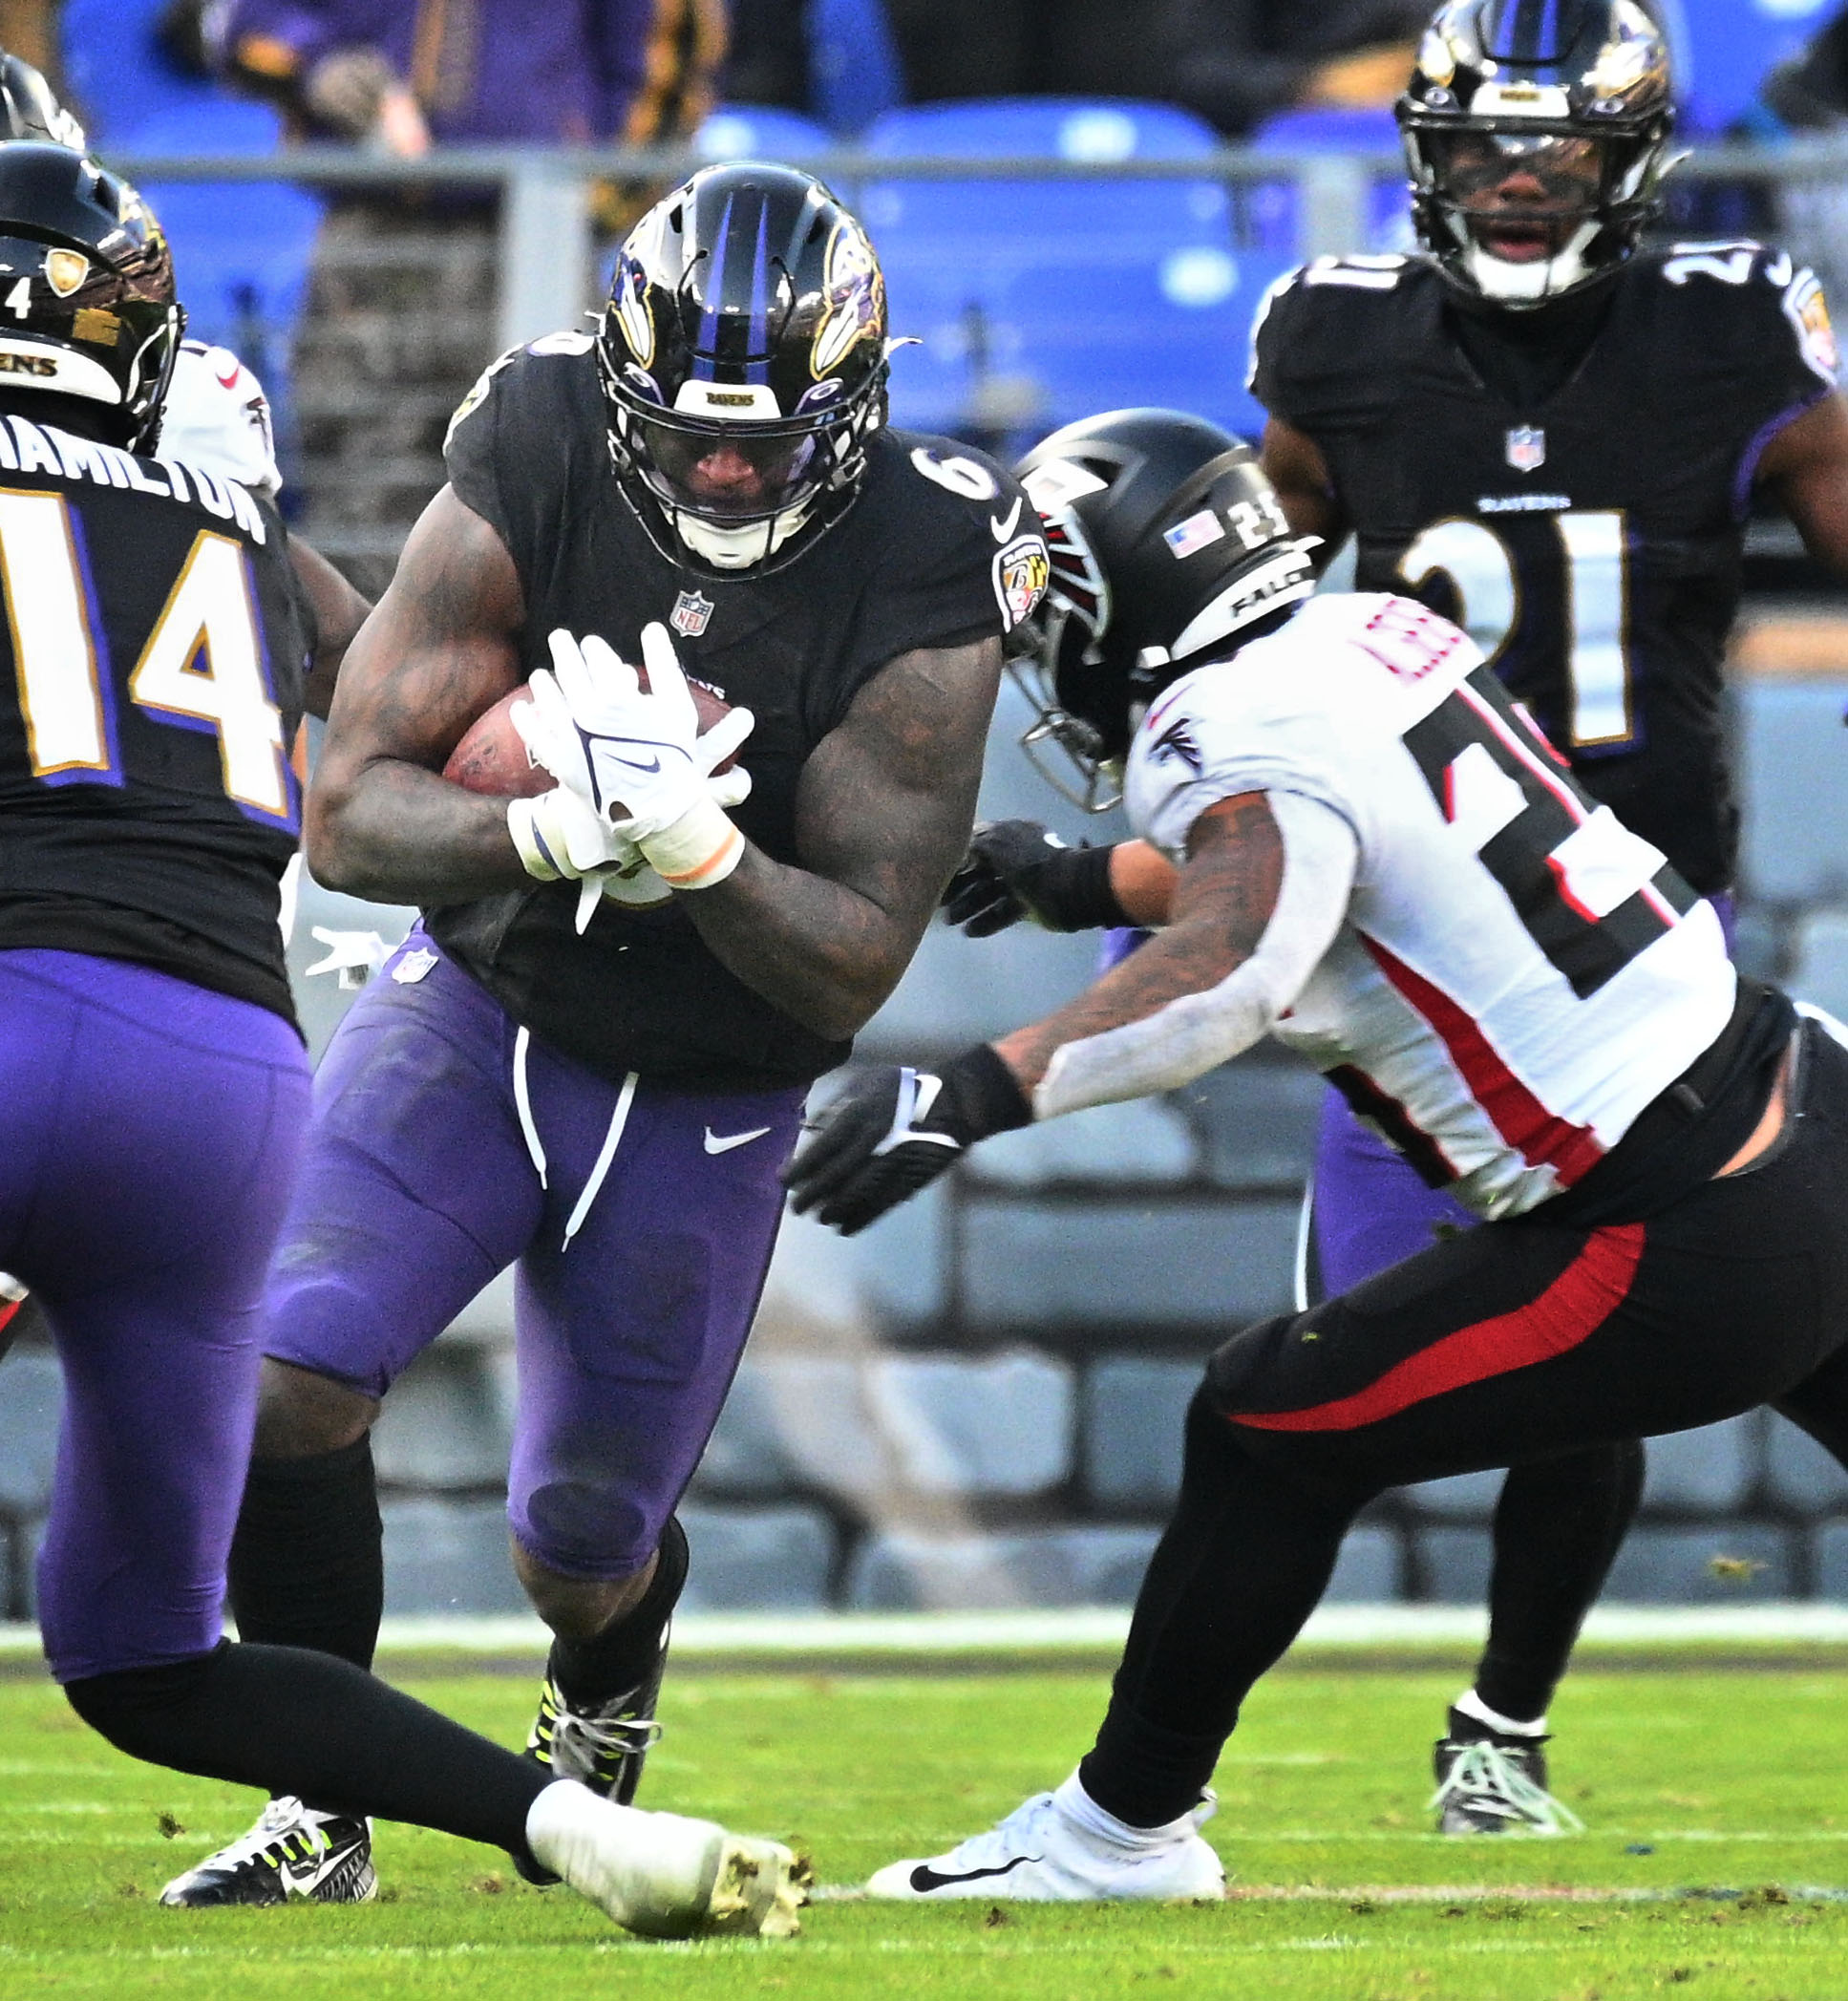 Analytical Review Of Falcons At Ravens - Baltimore Sports and Life